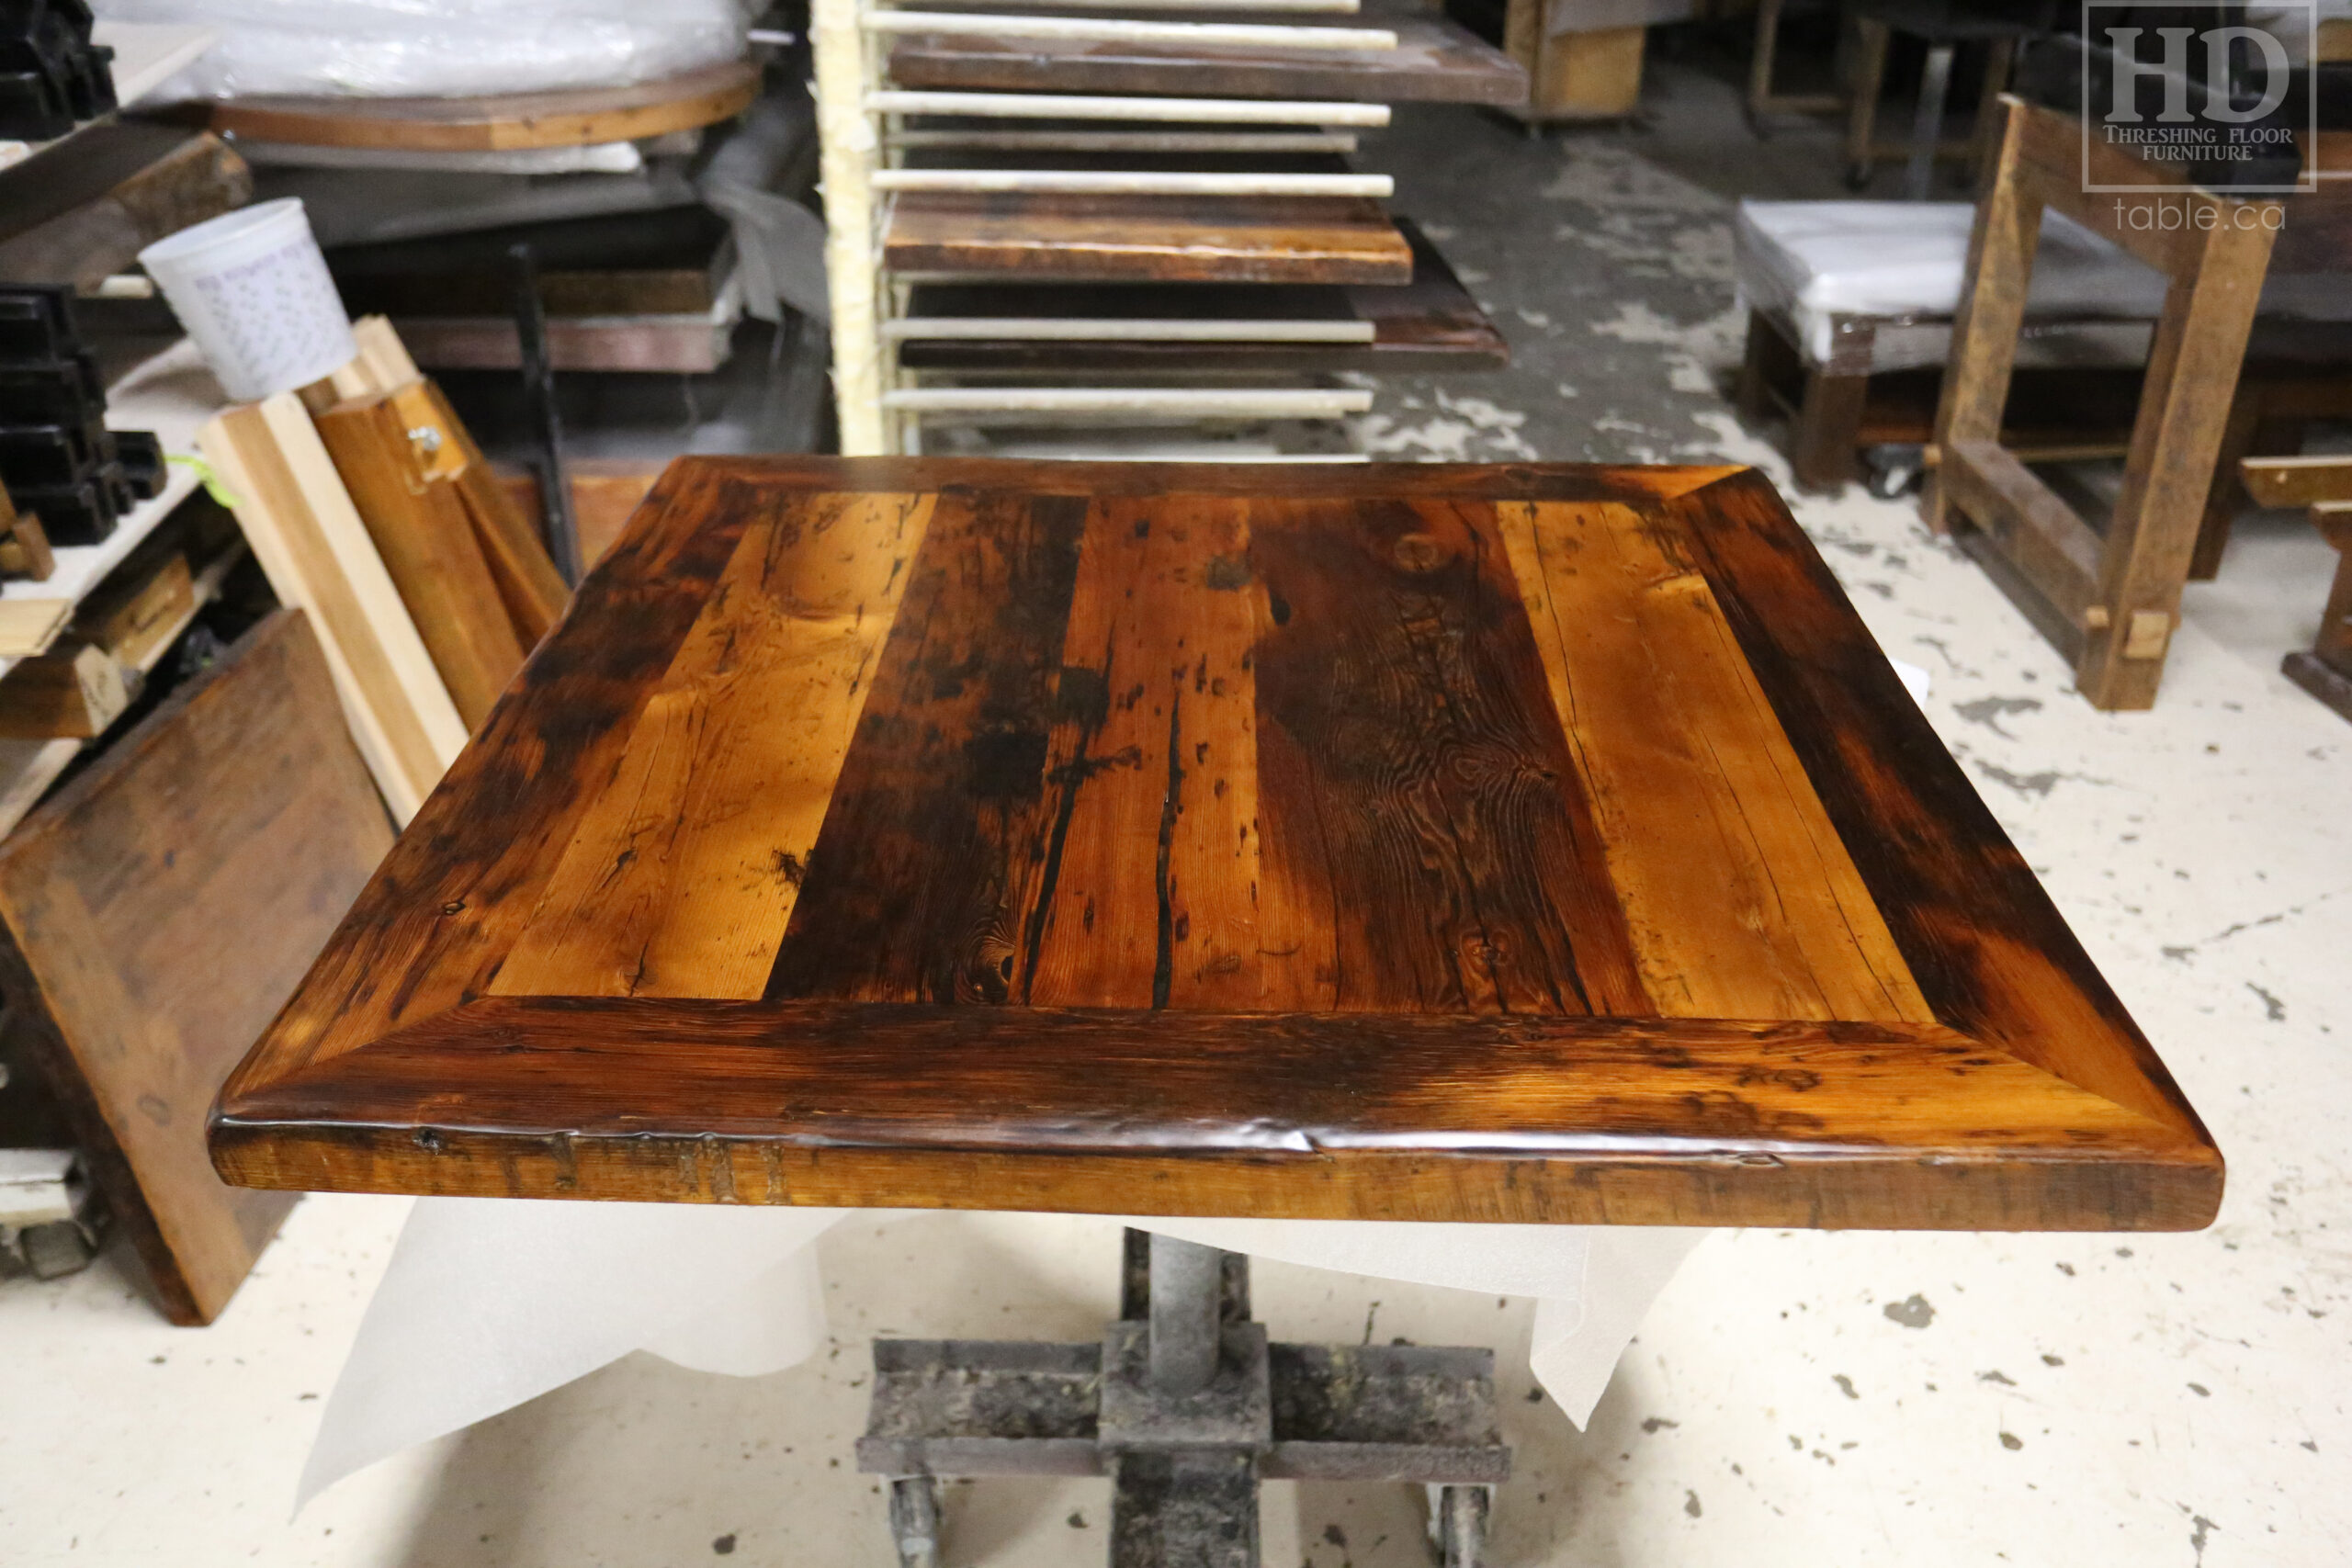 Restaurant Table Tops made from Reclaimed Ontario Barnwood by HD Threshing Floor Furniture / www.table.ca